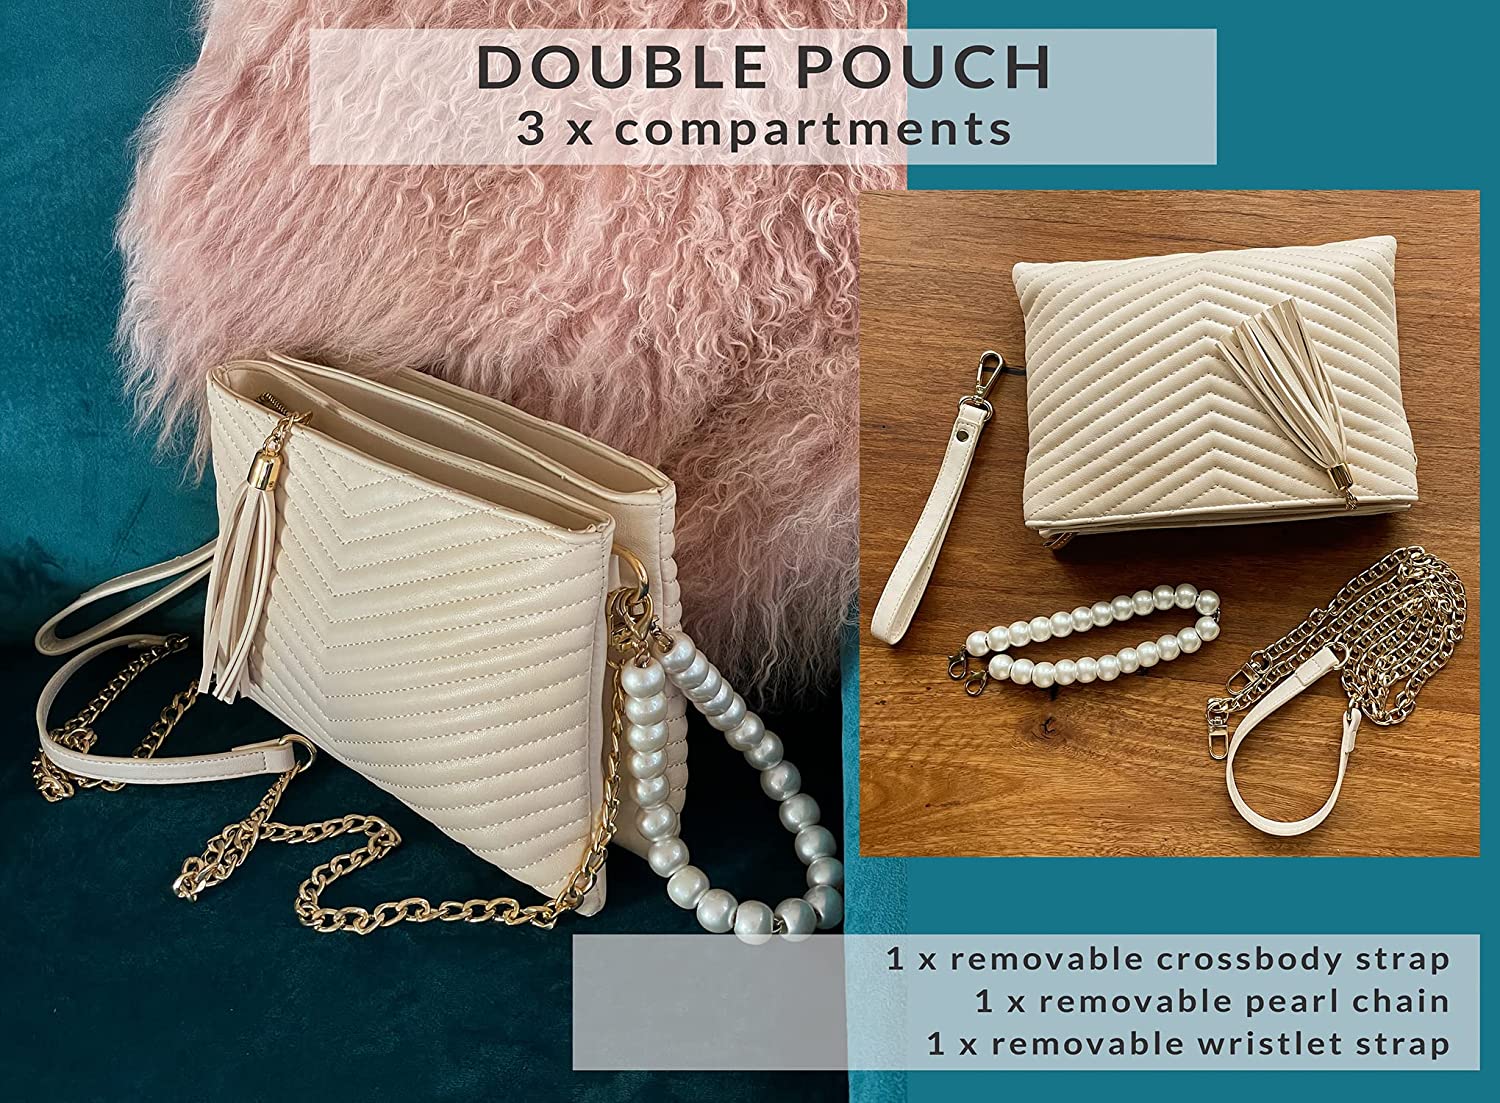 Before & Ever Double Pouch Wristlet Clutch Purses for Women - Large Evening Clutch Bag with White Pearls Crossbody